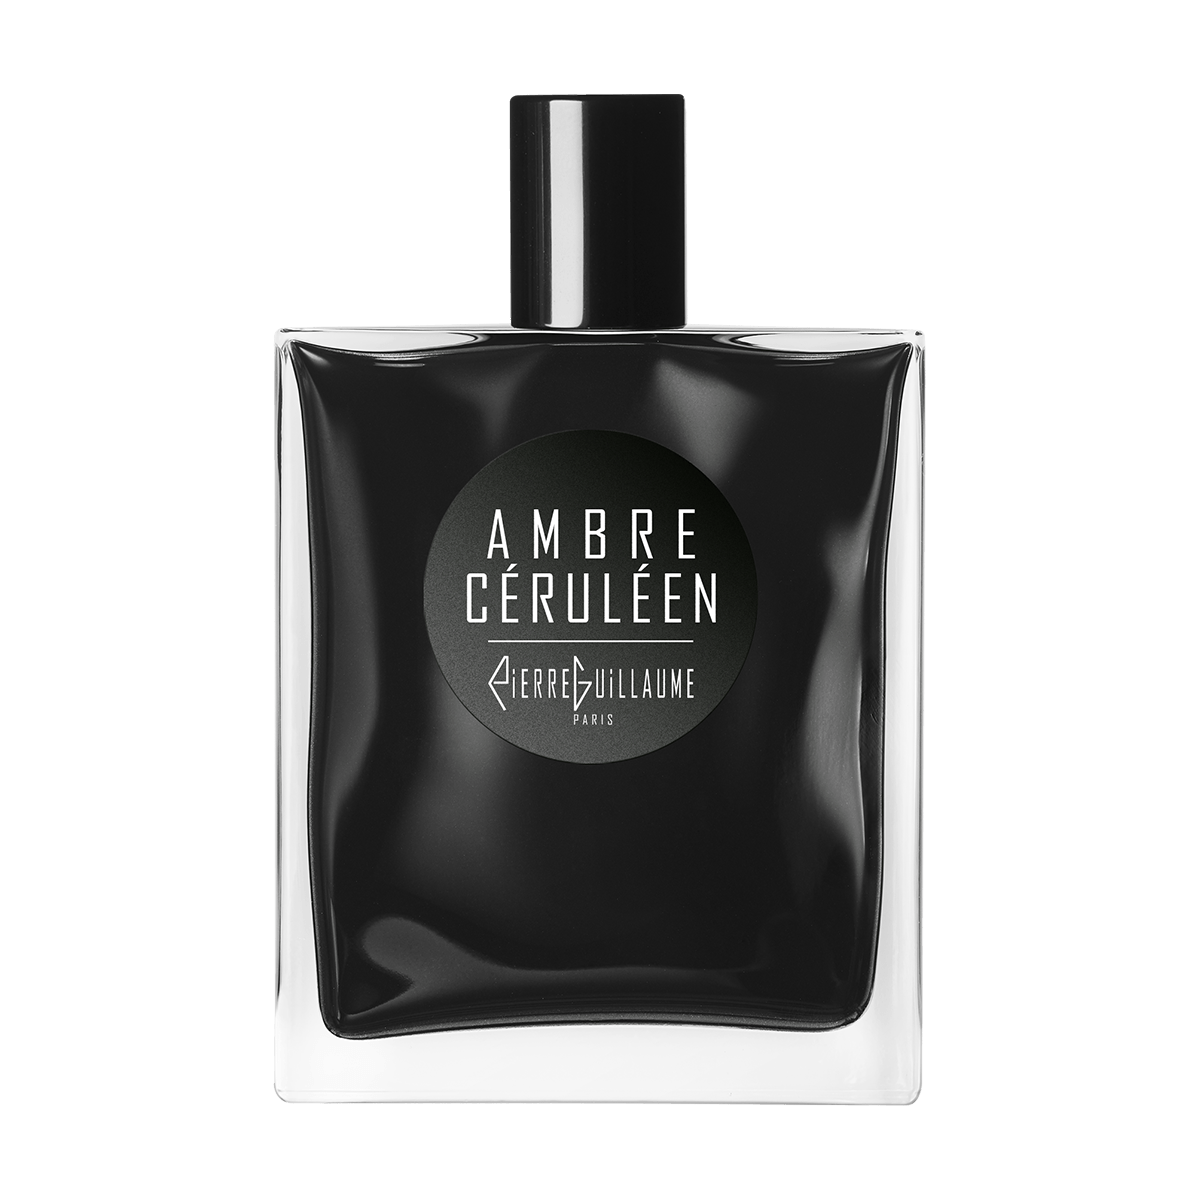 Pierre Guillaume - Ambre Ceruleen 100 ml | Perfume Lounge